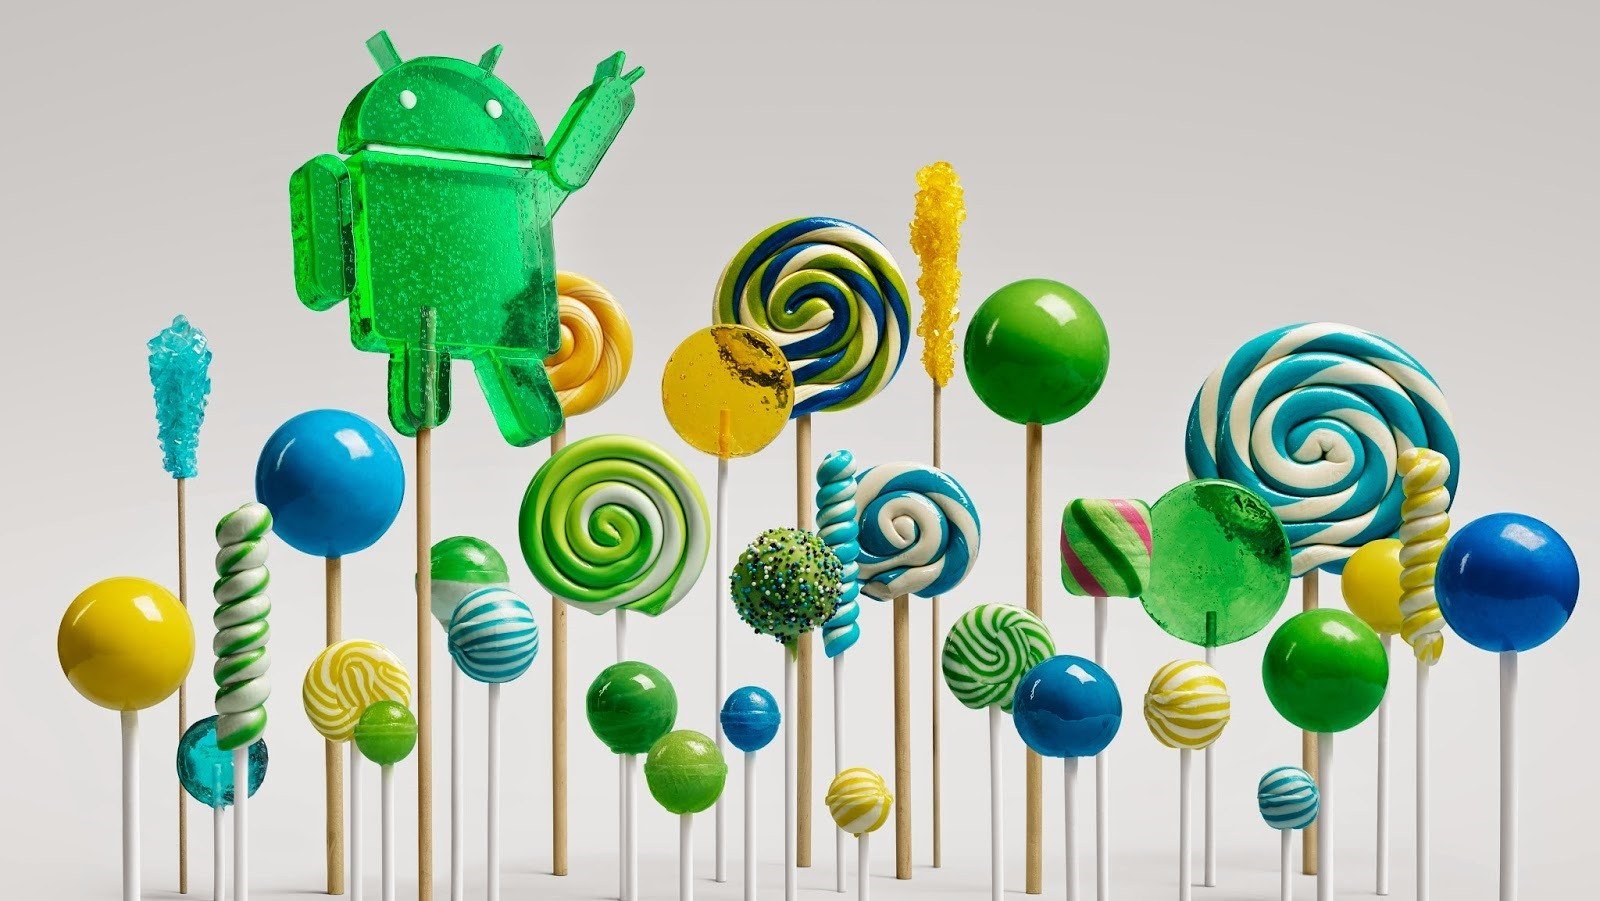 If You’re Looking For An Honest Review of Android 5.0 Lollipop, You Can’t Miss This